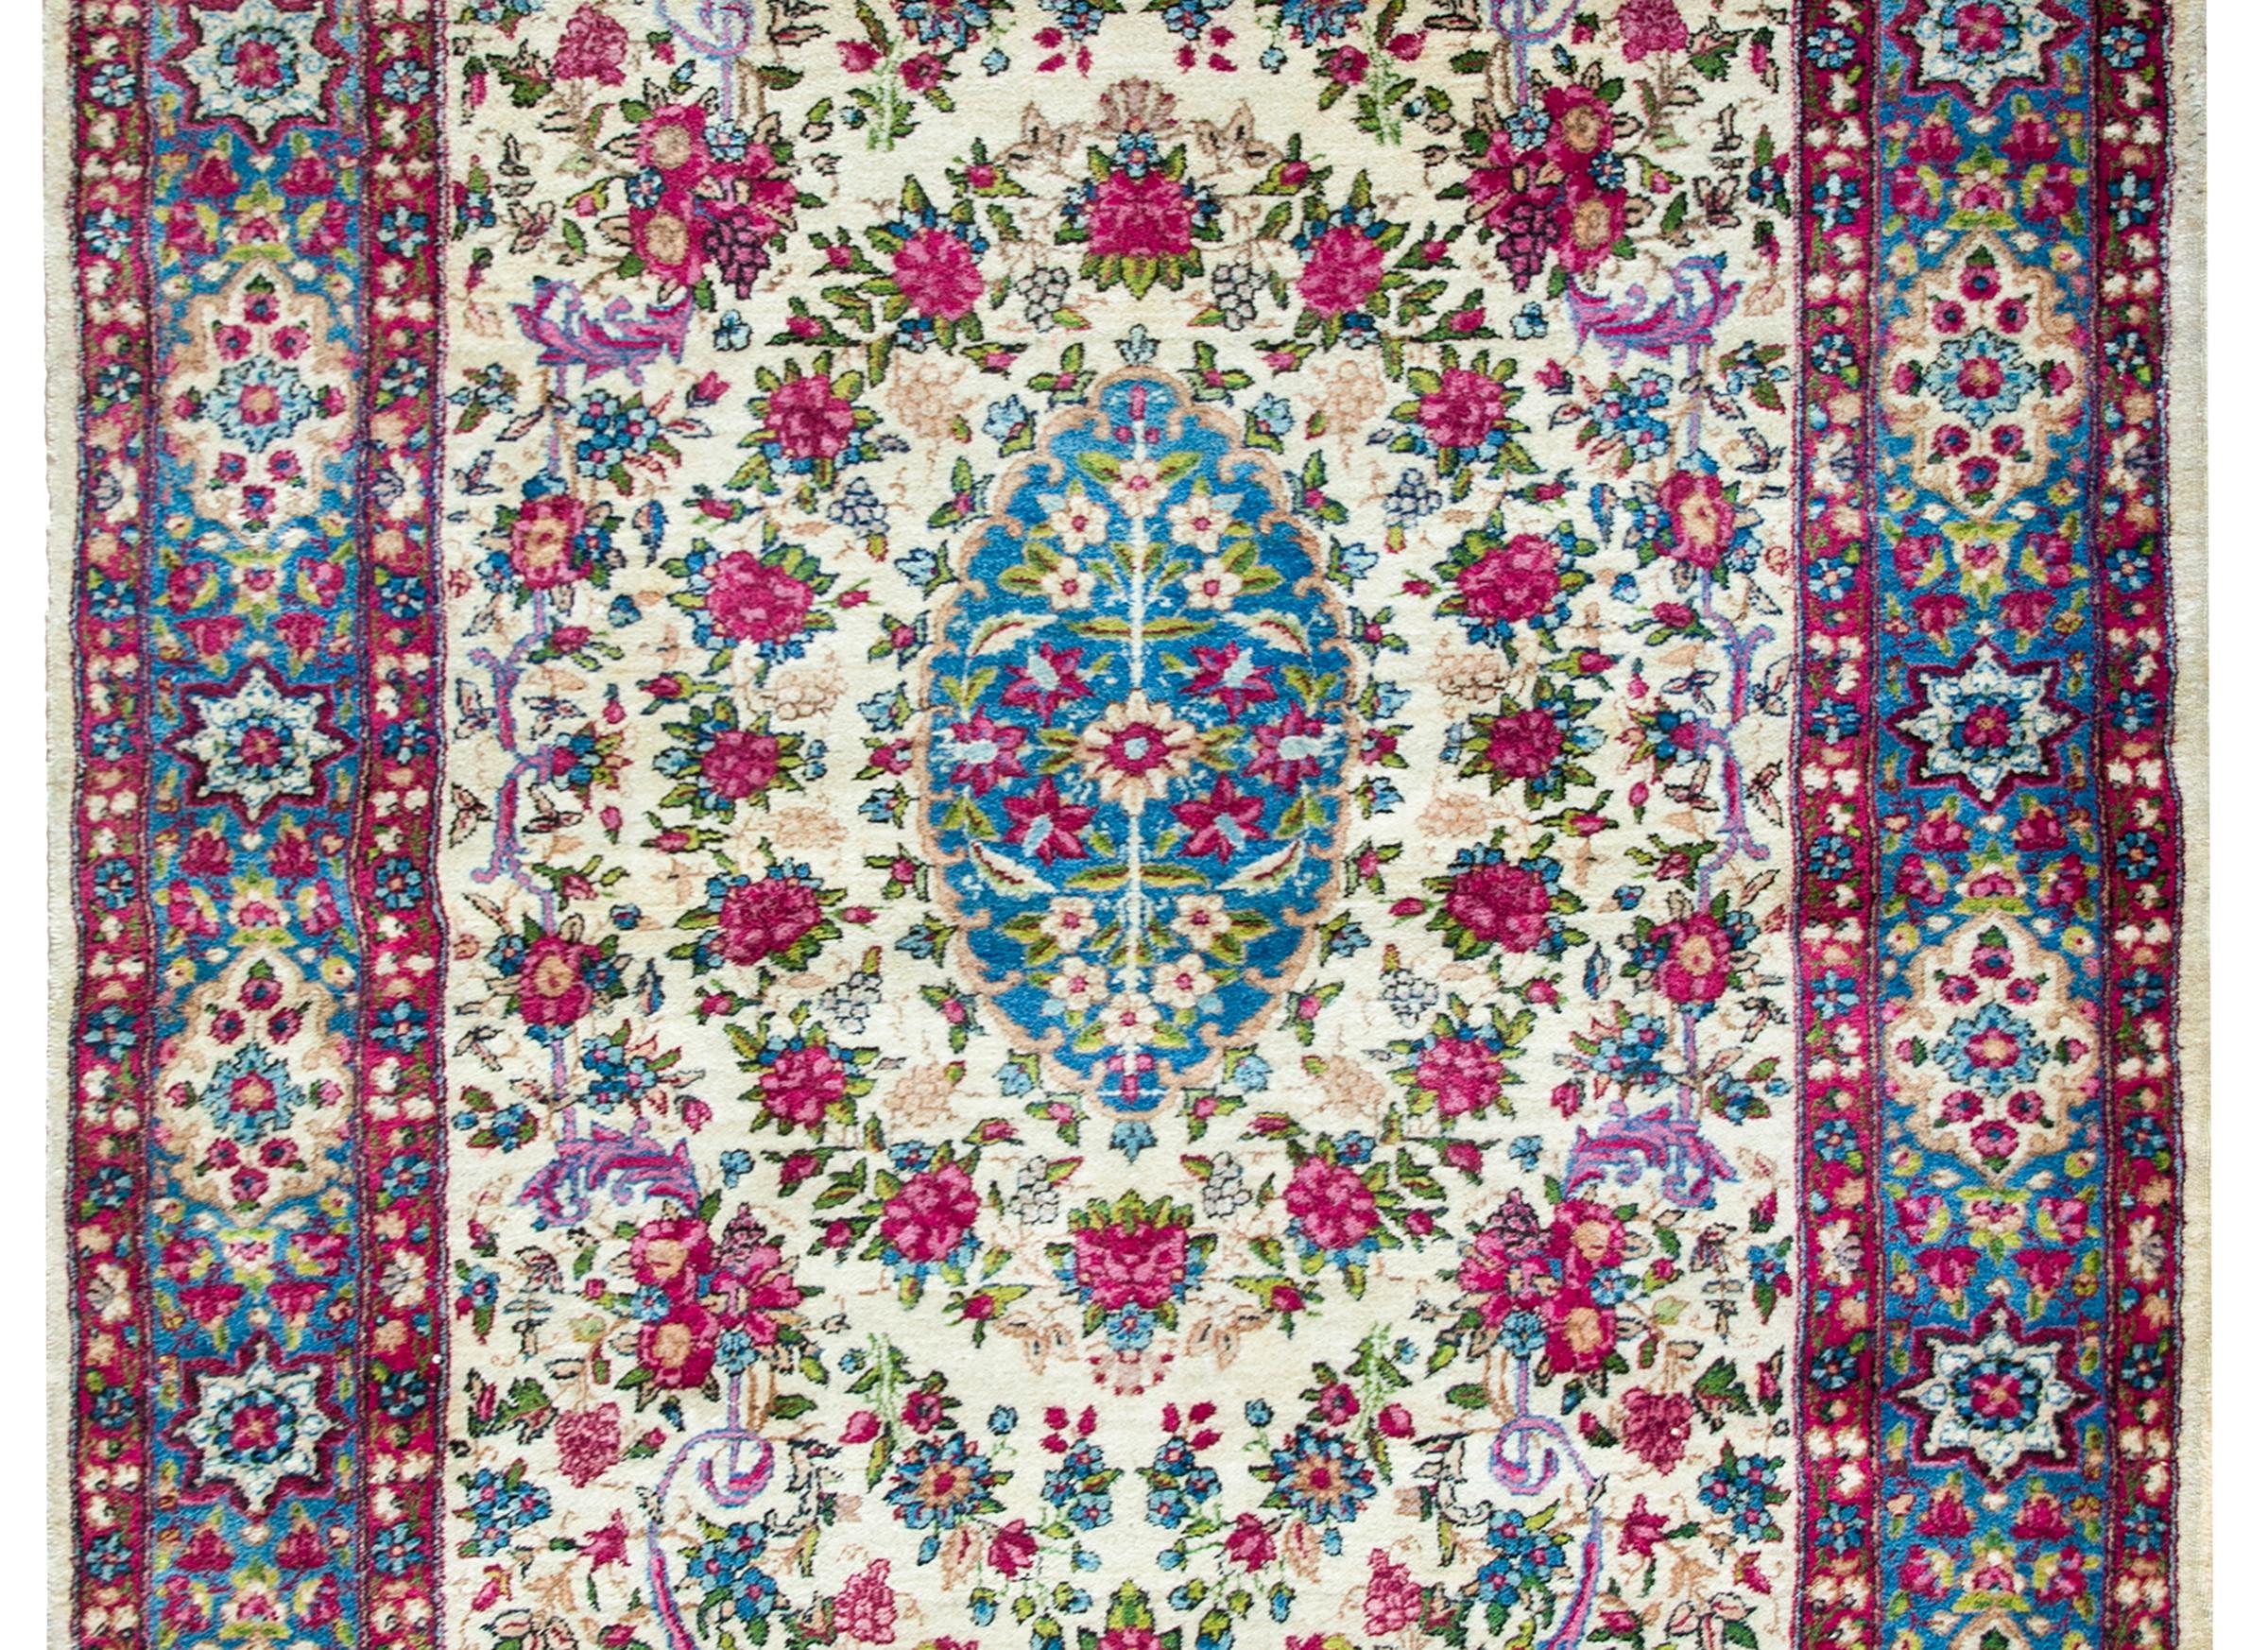 A sweet early 20th century Persian Kirman rug with a stunning pattern with myriad flowers woven in pinks, fuchsias, indigos and green, all set against a cream colors background, and surrounded by a complex stylized floral patterned border.